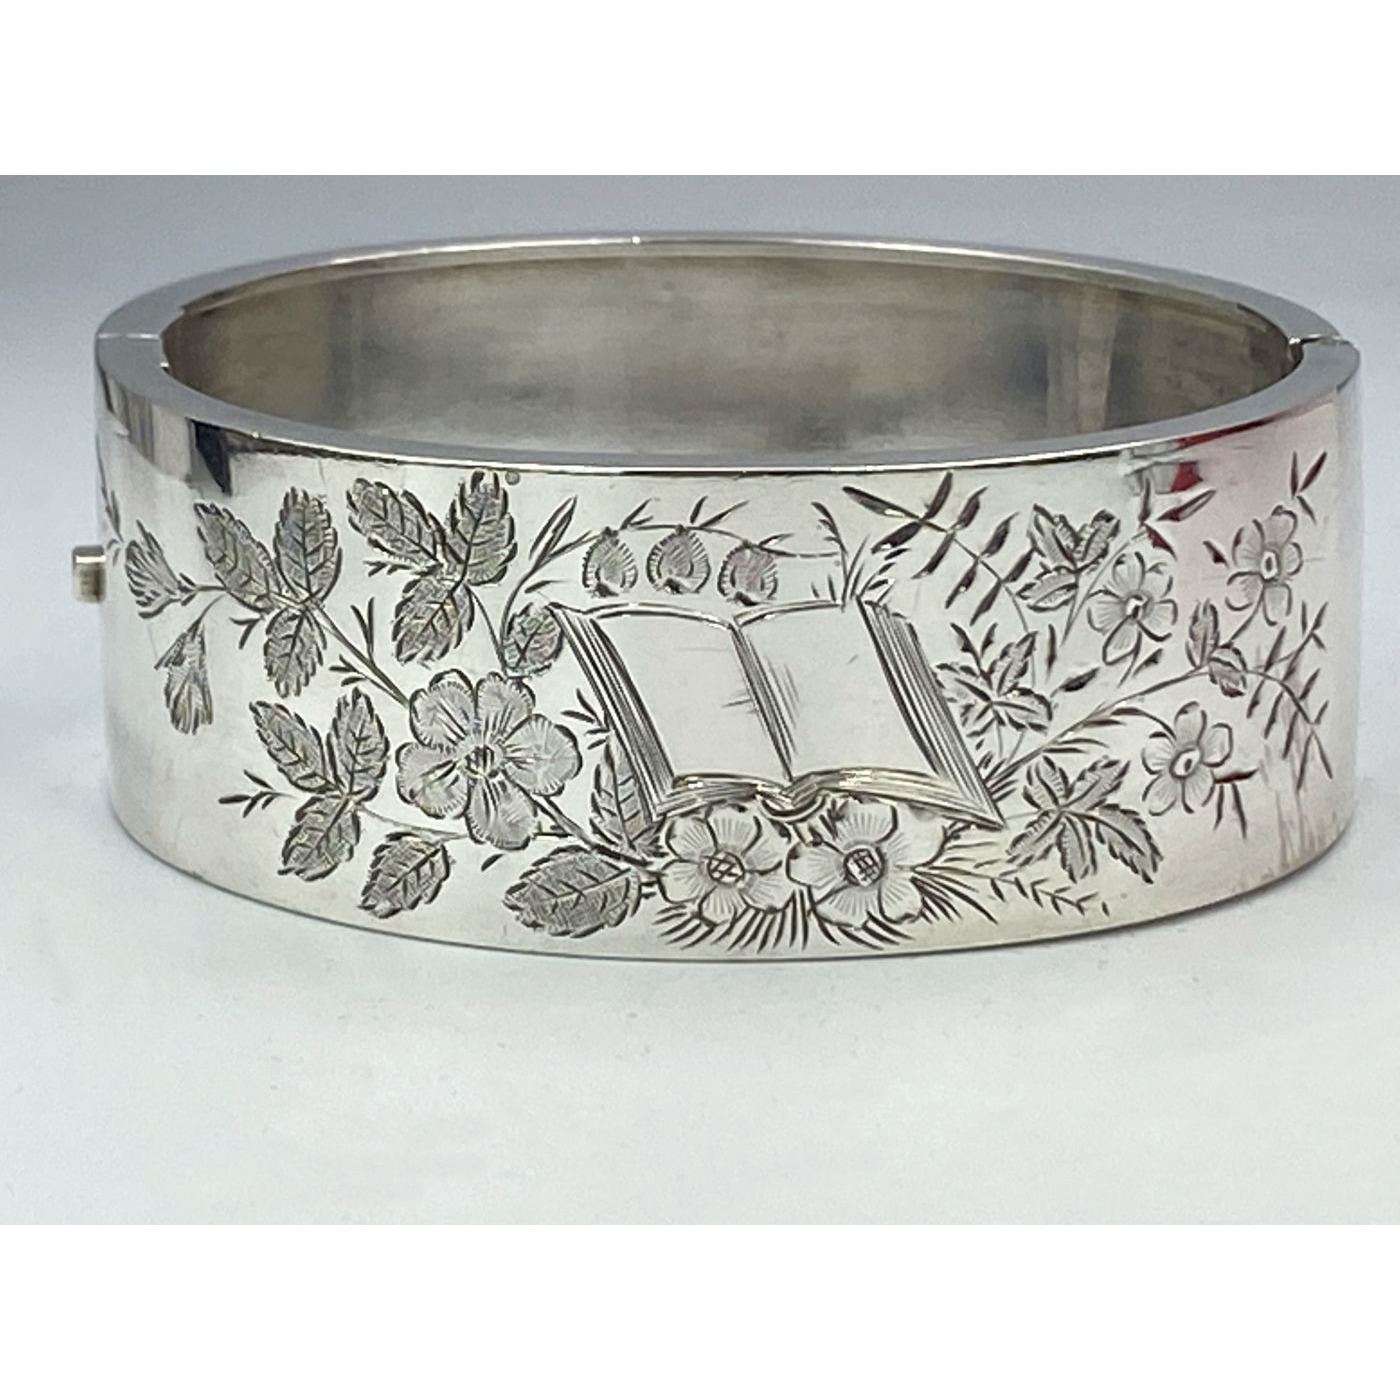 Highly Unusual Engraved Book Antique English Silver Bangle